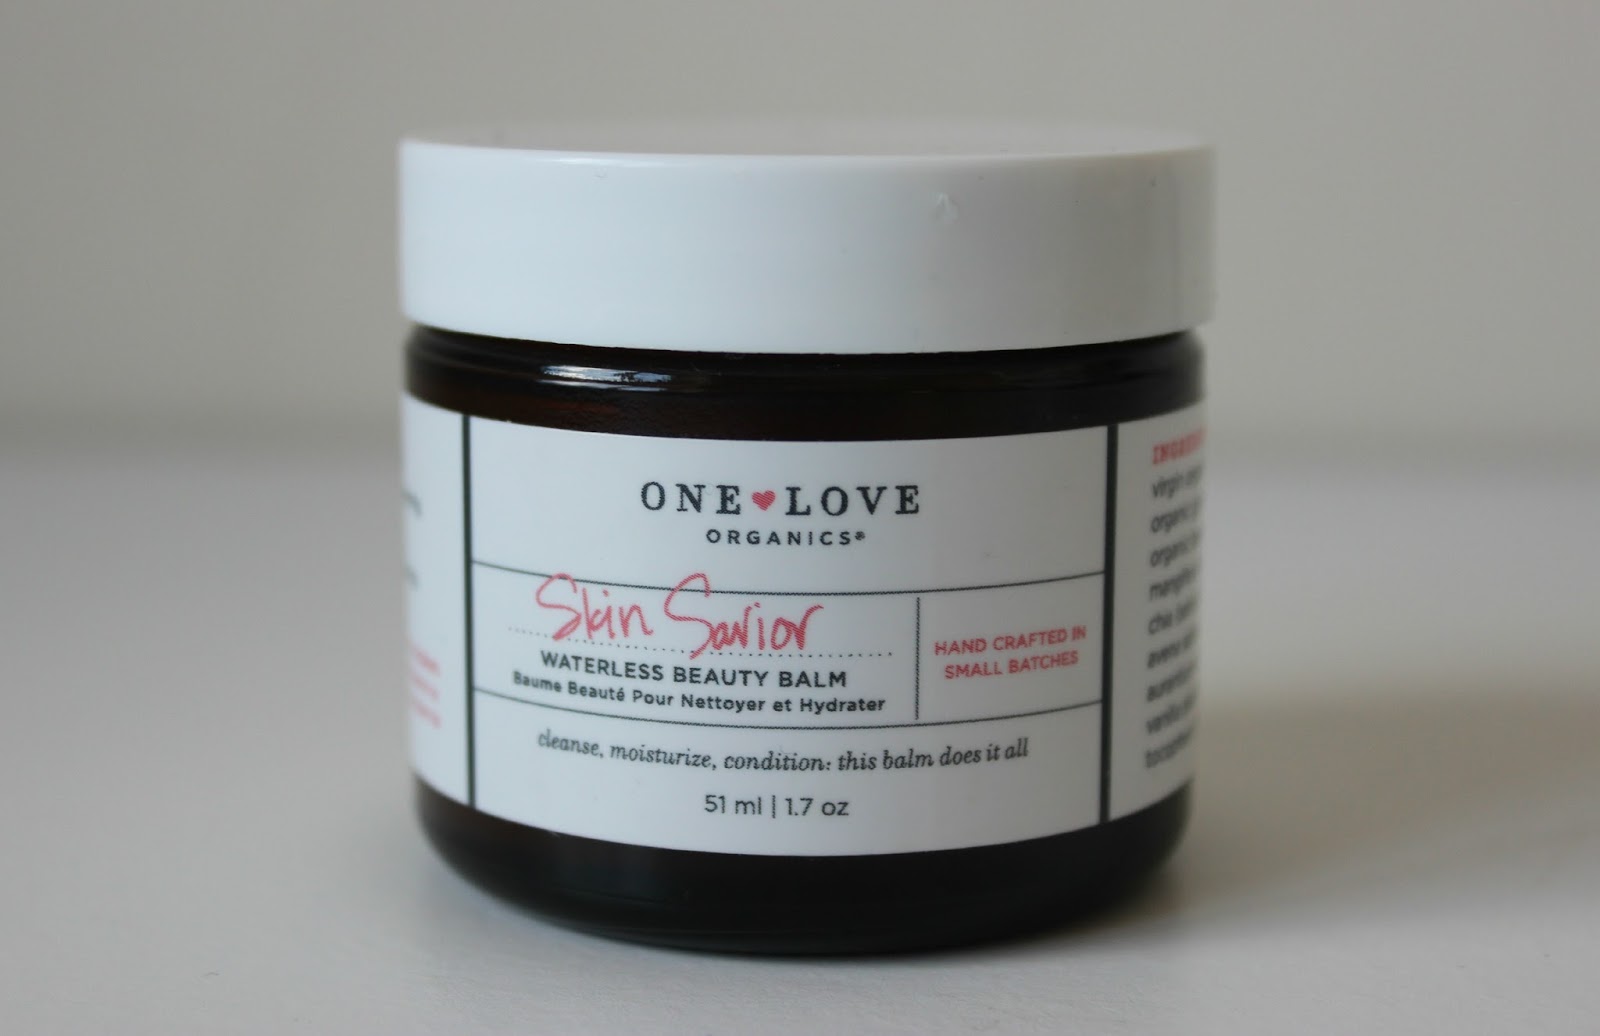 A picture of the One Love Organics Skin Saviour Waterless Beauty Balm